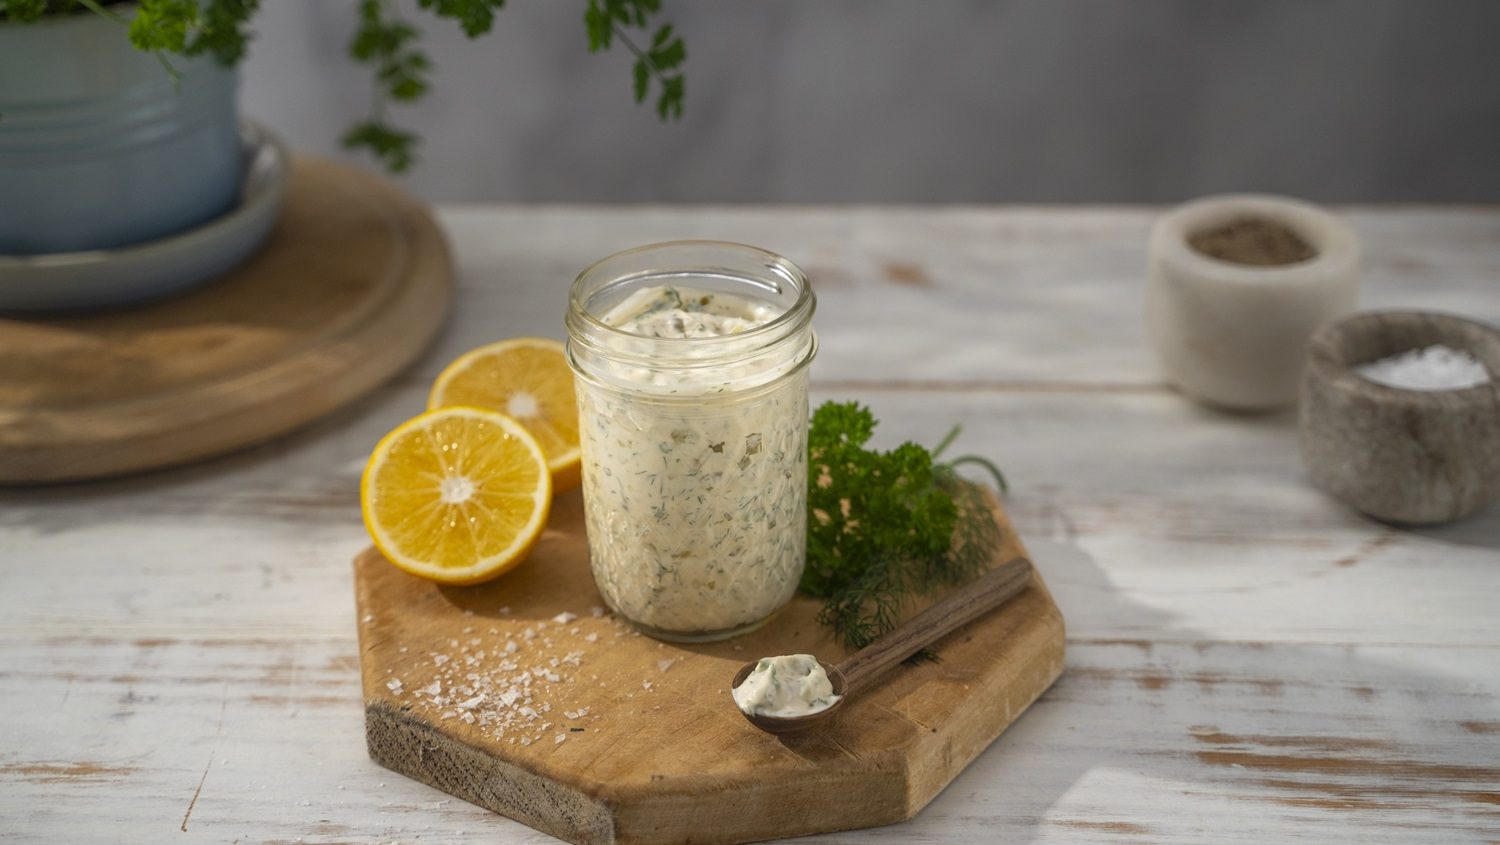 A jar full of whiteish sauce with lemon halves, parsley and garlic by its side on wooden board.